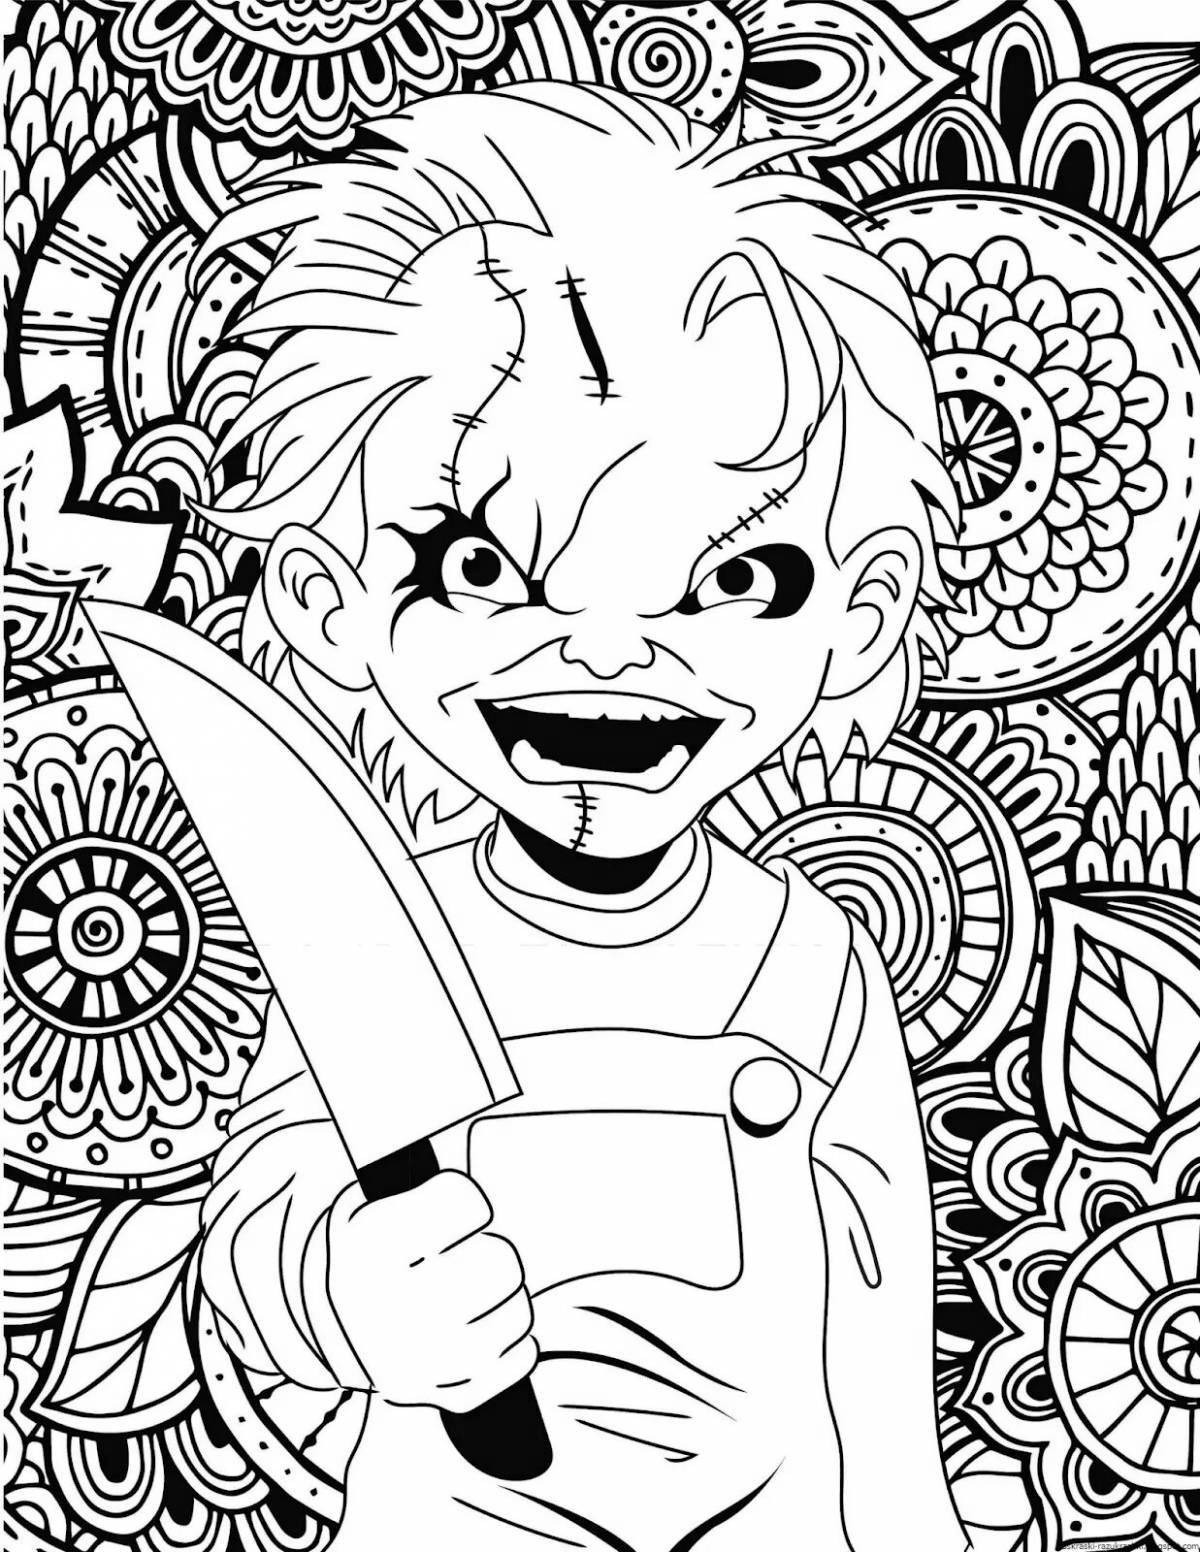 Colorful coloring book for 18 year old boys